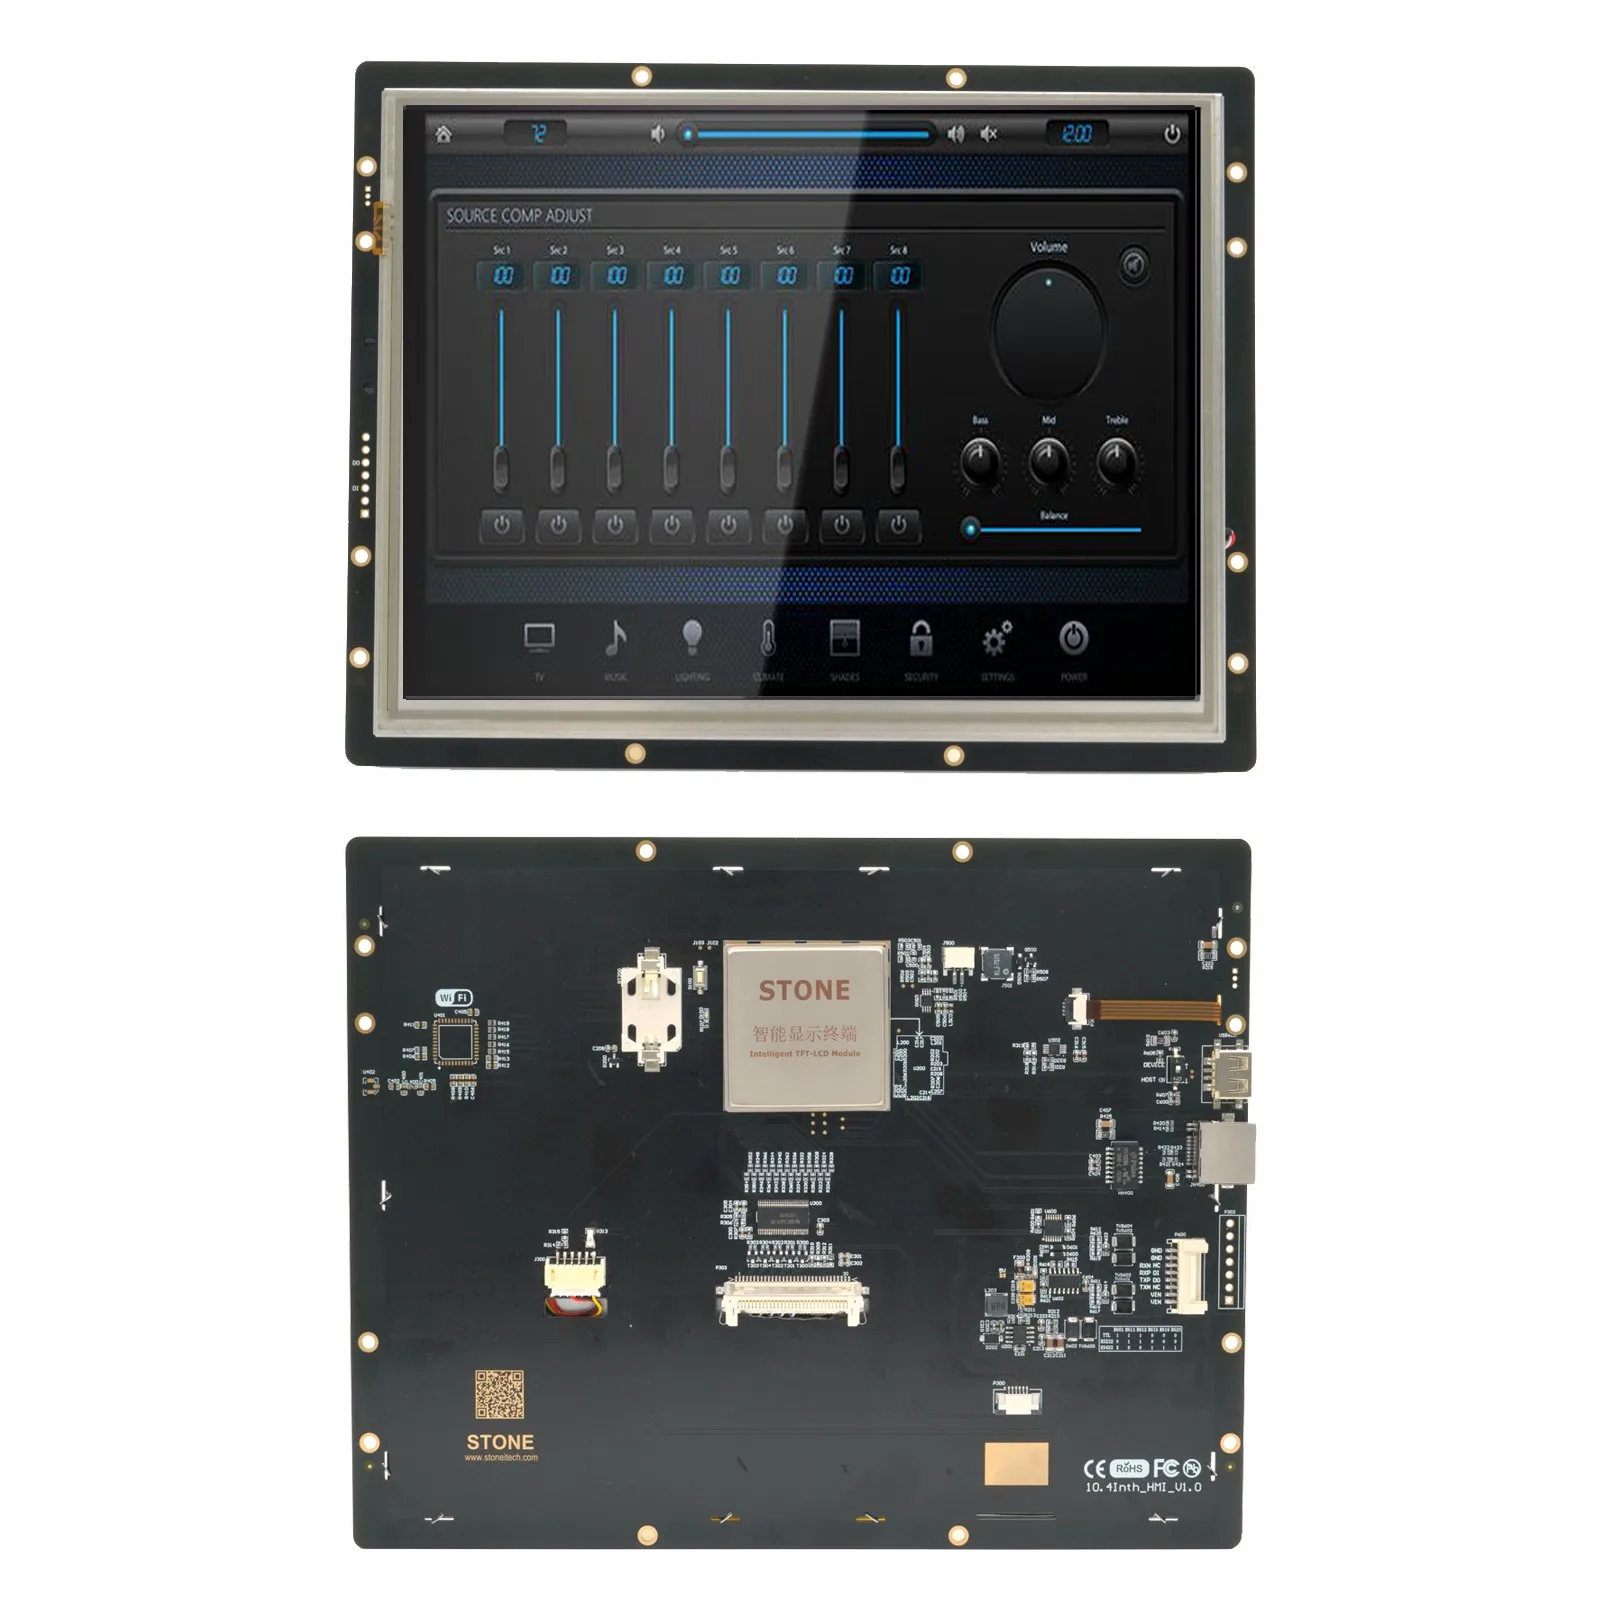 

10.4" Smart HMI Monitor 7-28V DC power supply to work with the display provide the cable, converter, software and manual